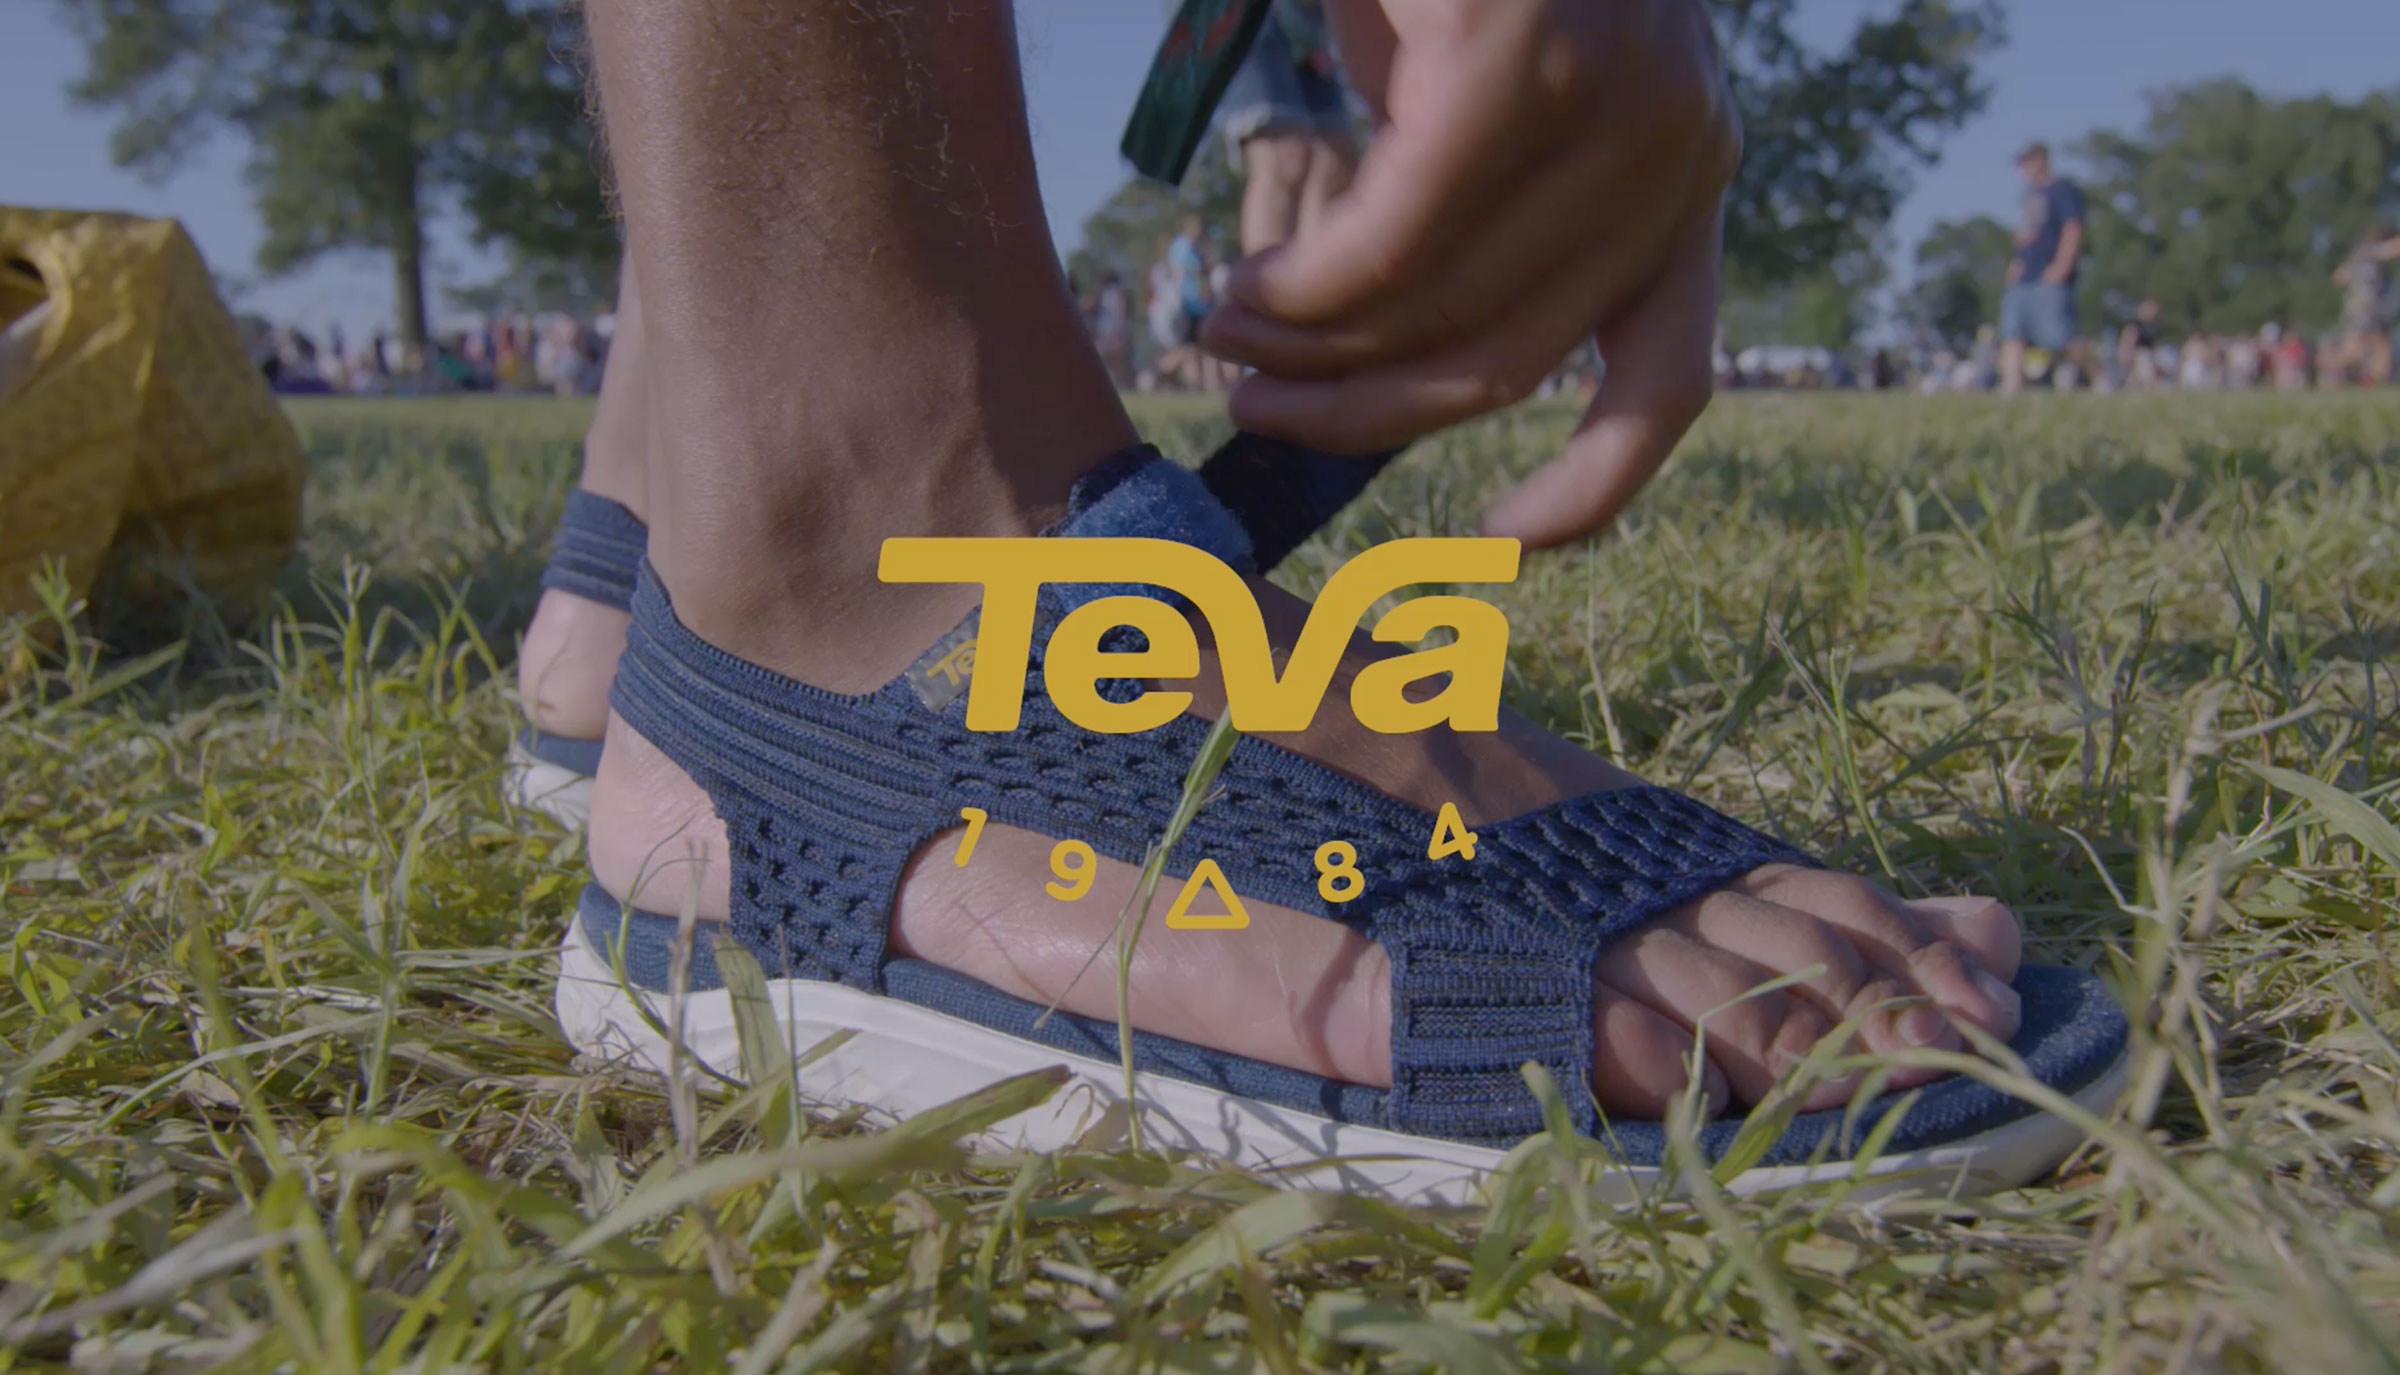 Teva logo over a photo of foot in a sandal